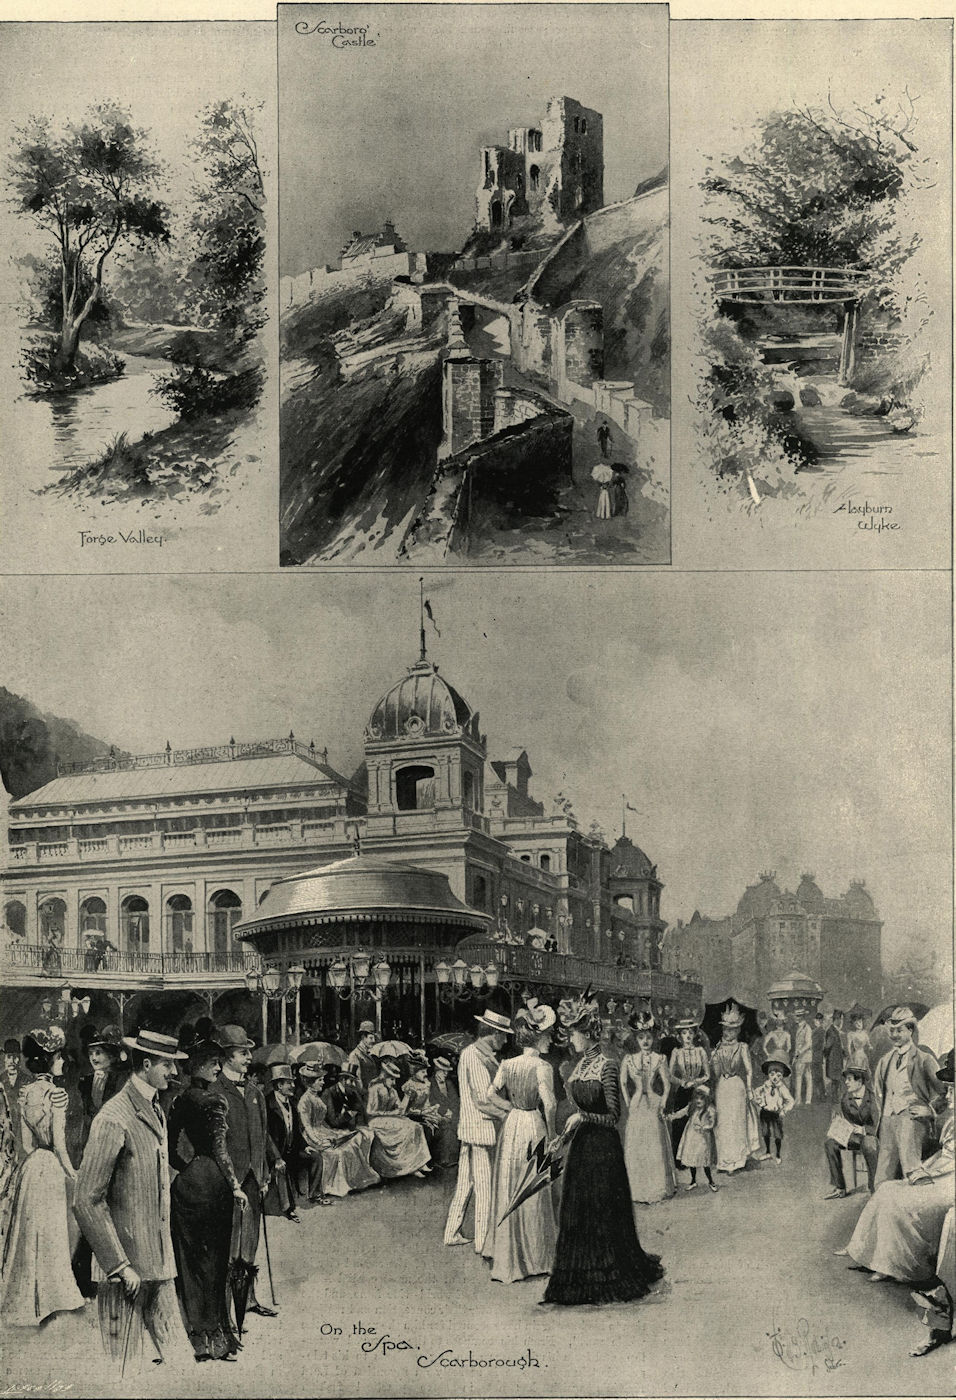 Holiday haunts: Scarborough, queen of northern watering places. Yorkshire 1899